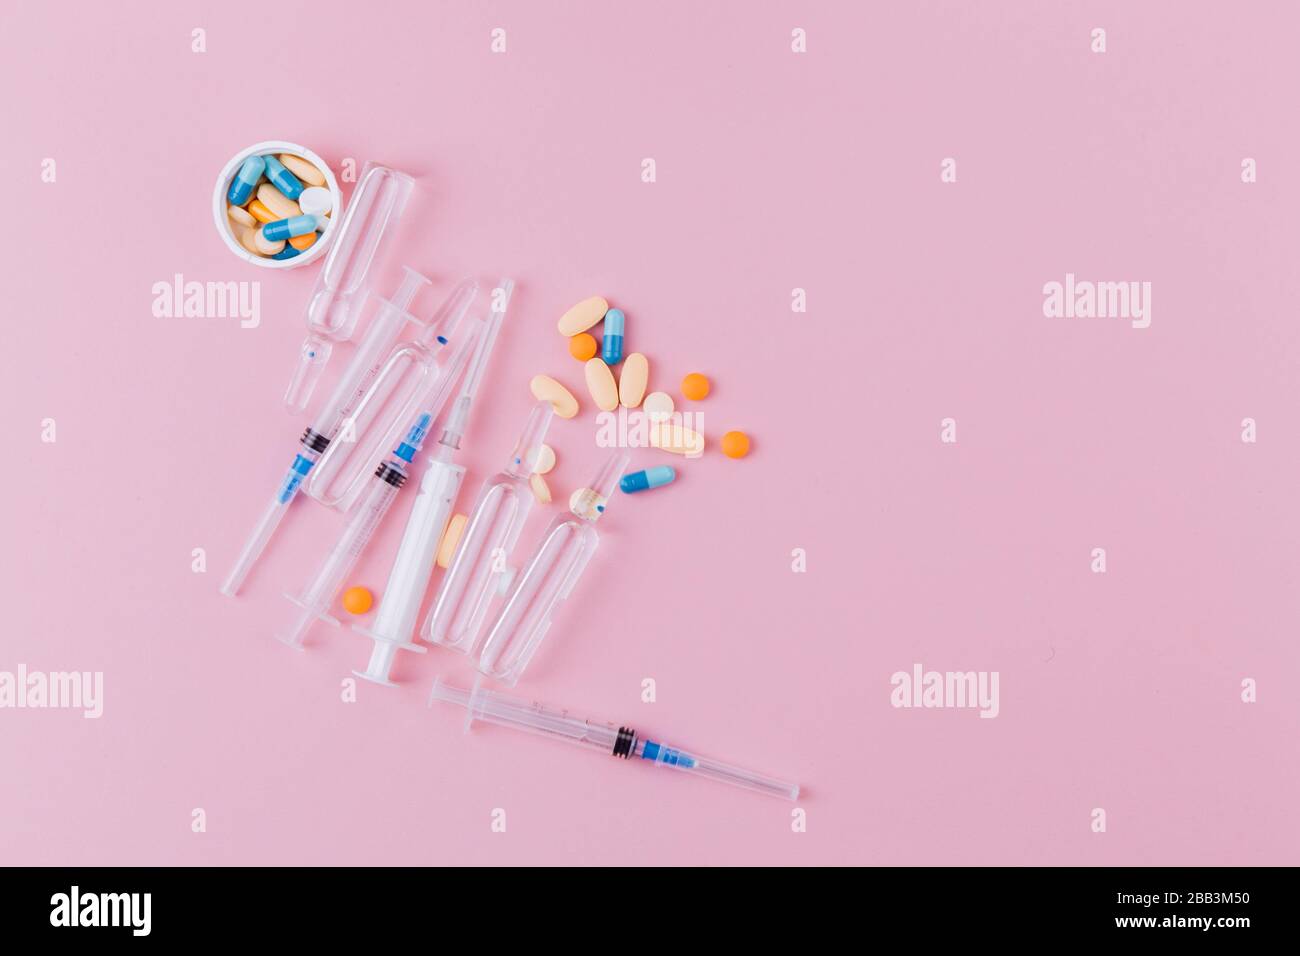 Syringe and ampoules with medicine, a jar with a variety of pills on a pink background. poses a pandemic hazard. Stock Photo